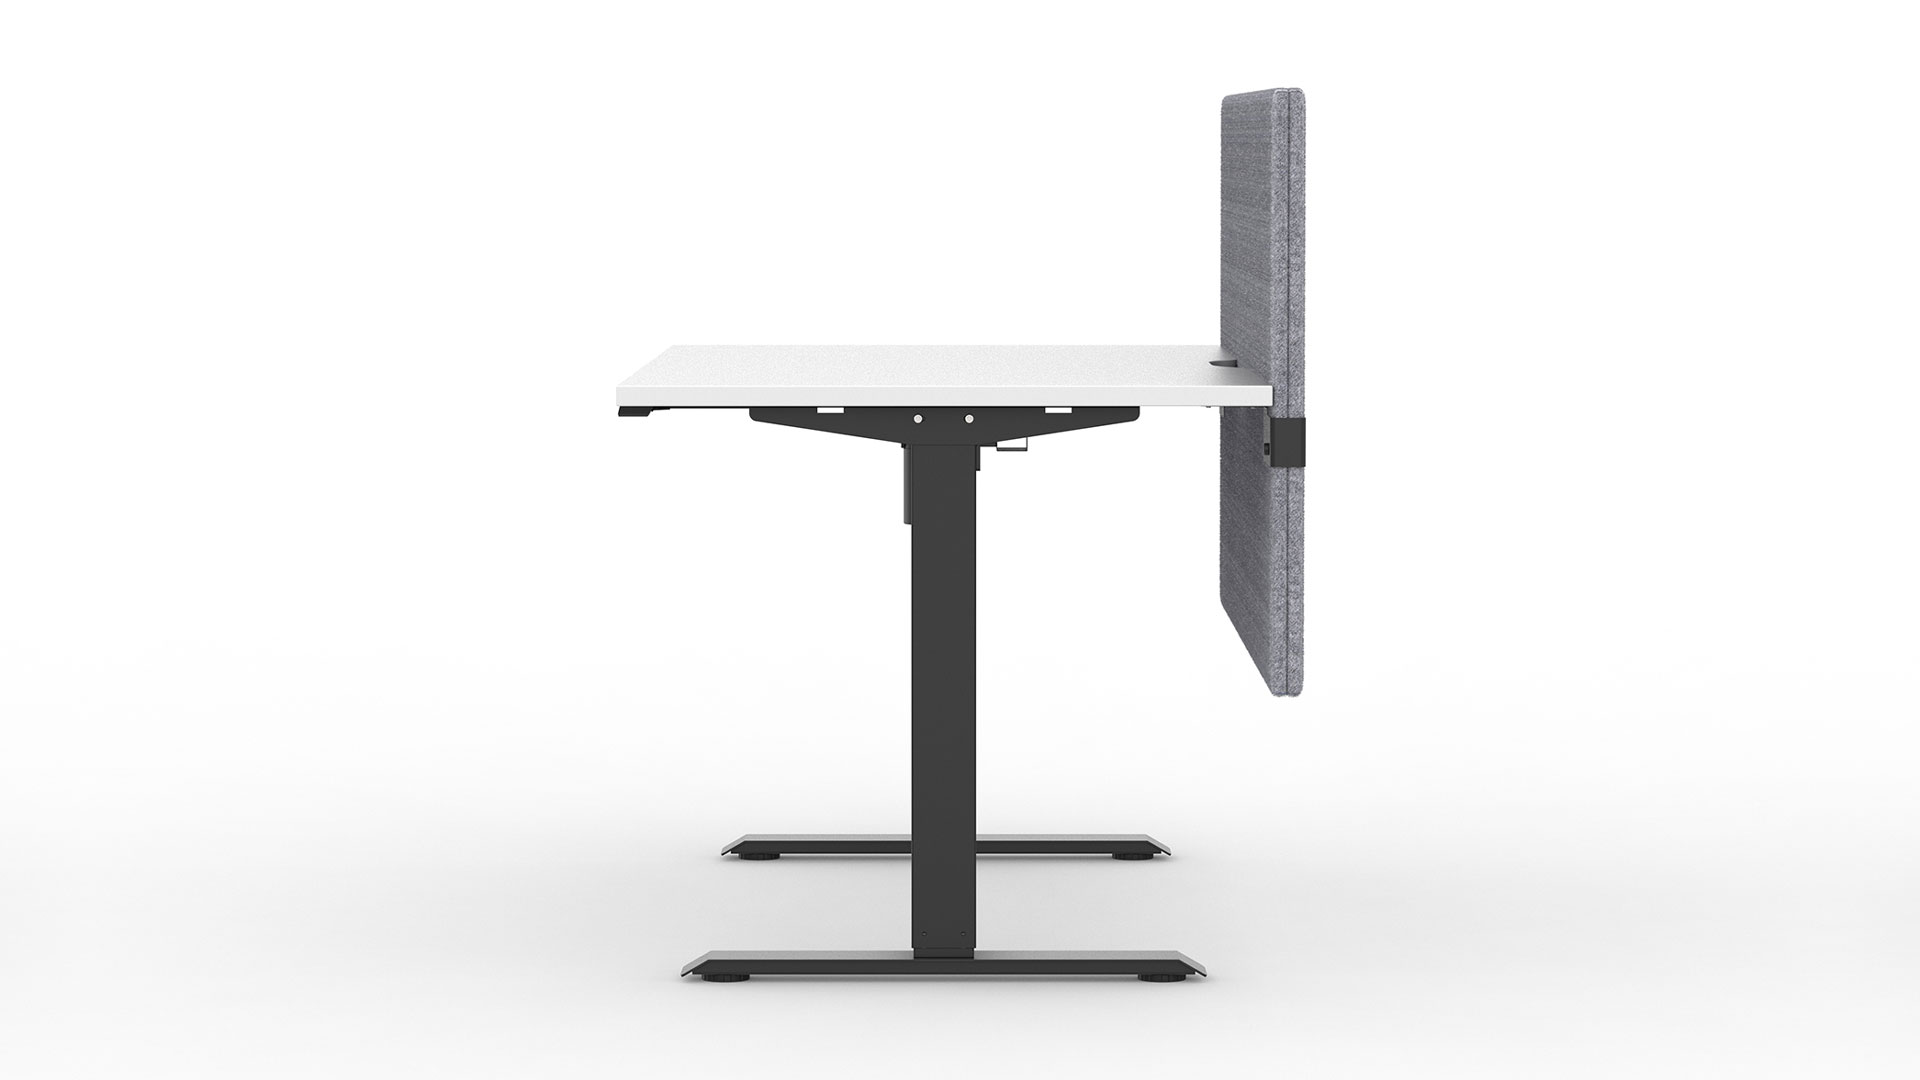 Acoustic desk screens are double-sided and attach to the desktop, maintaining privacy when the desk is raised.